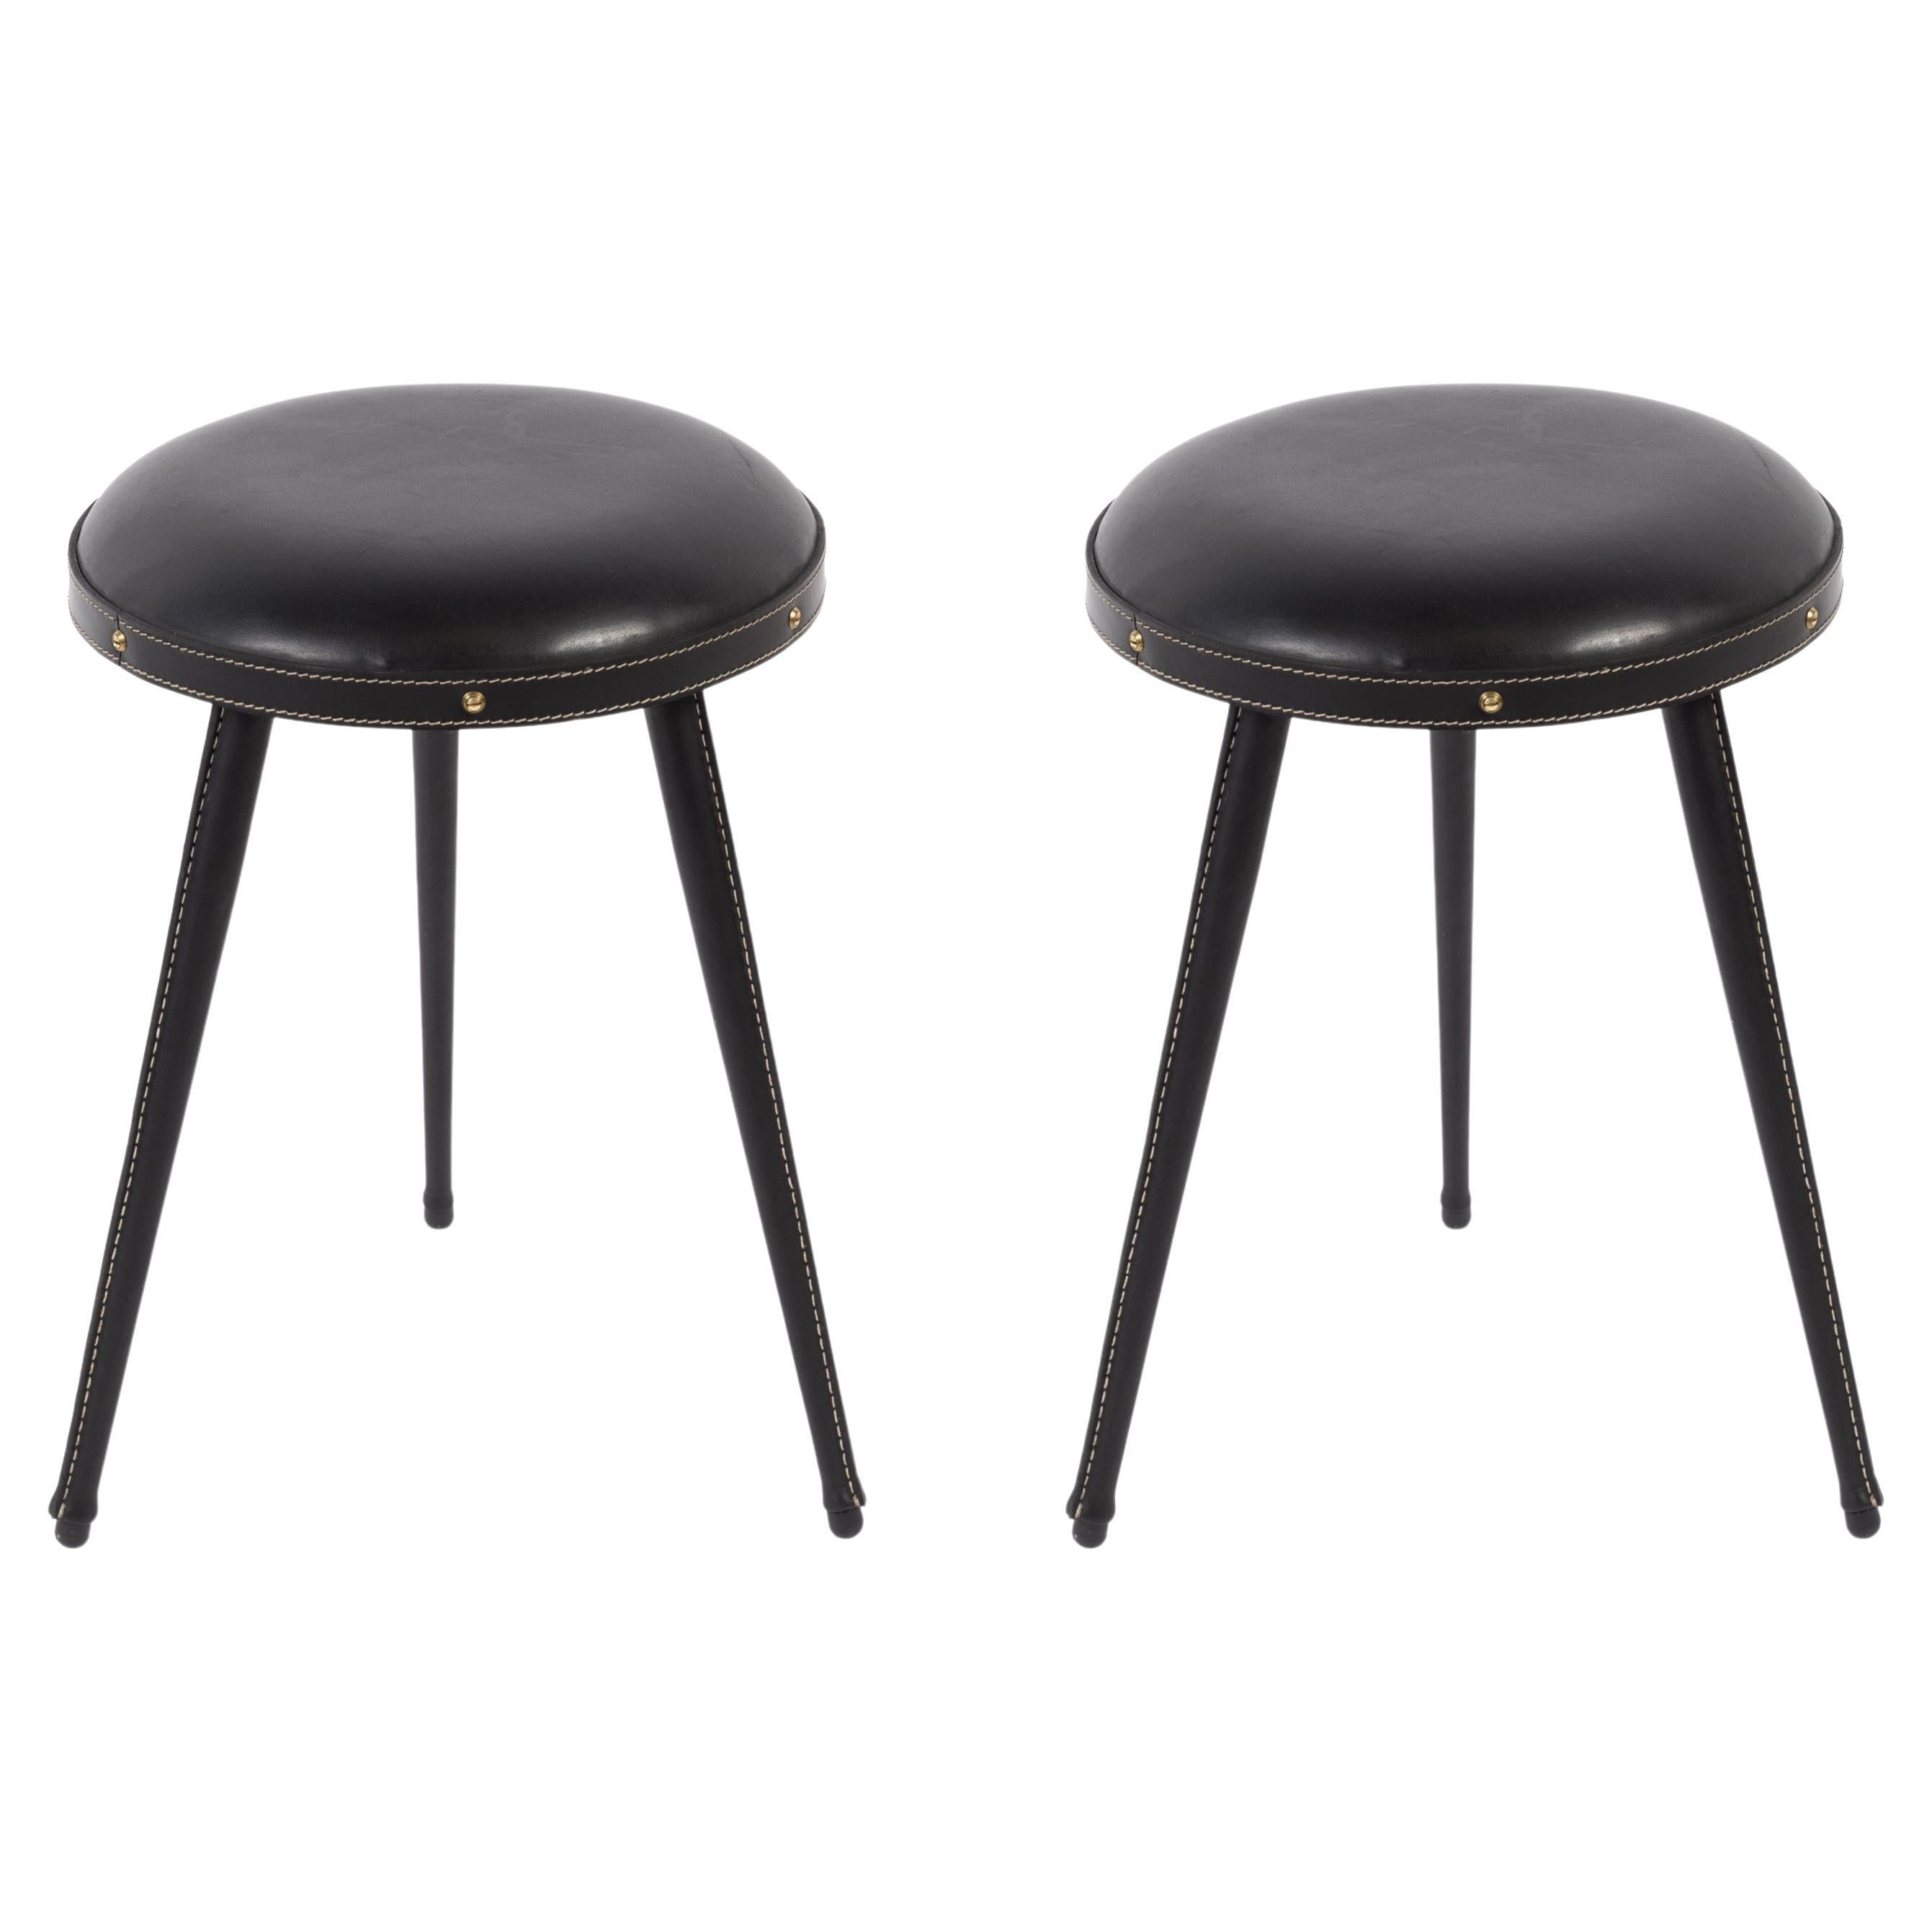 1950's Stitched Leather Pair of Stools by Jacques Adnet